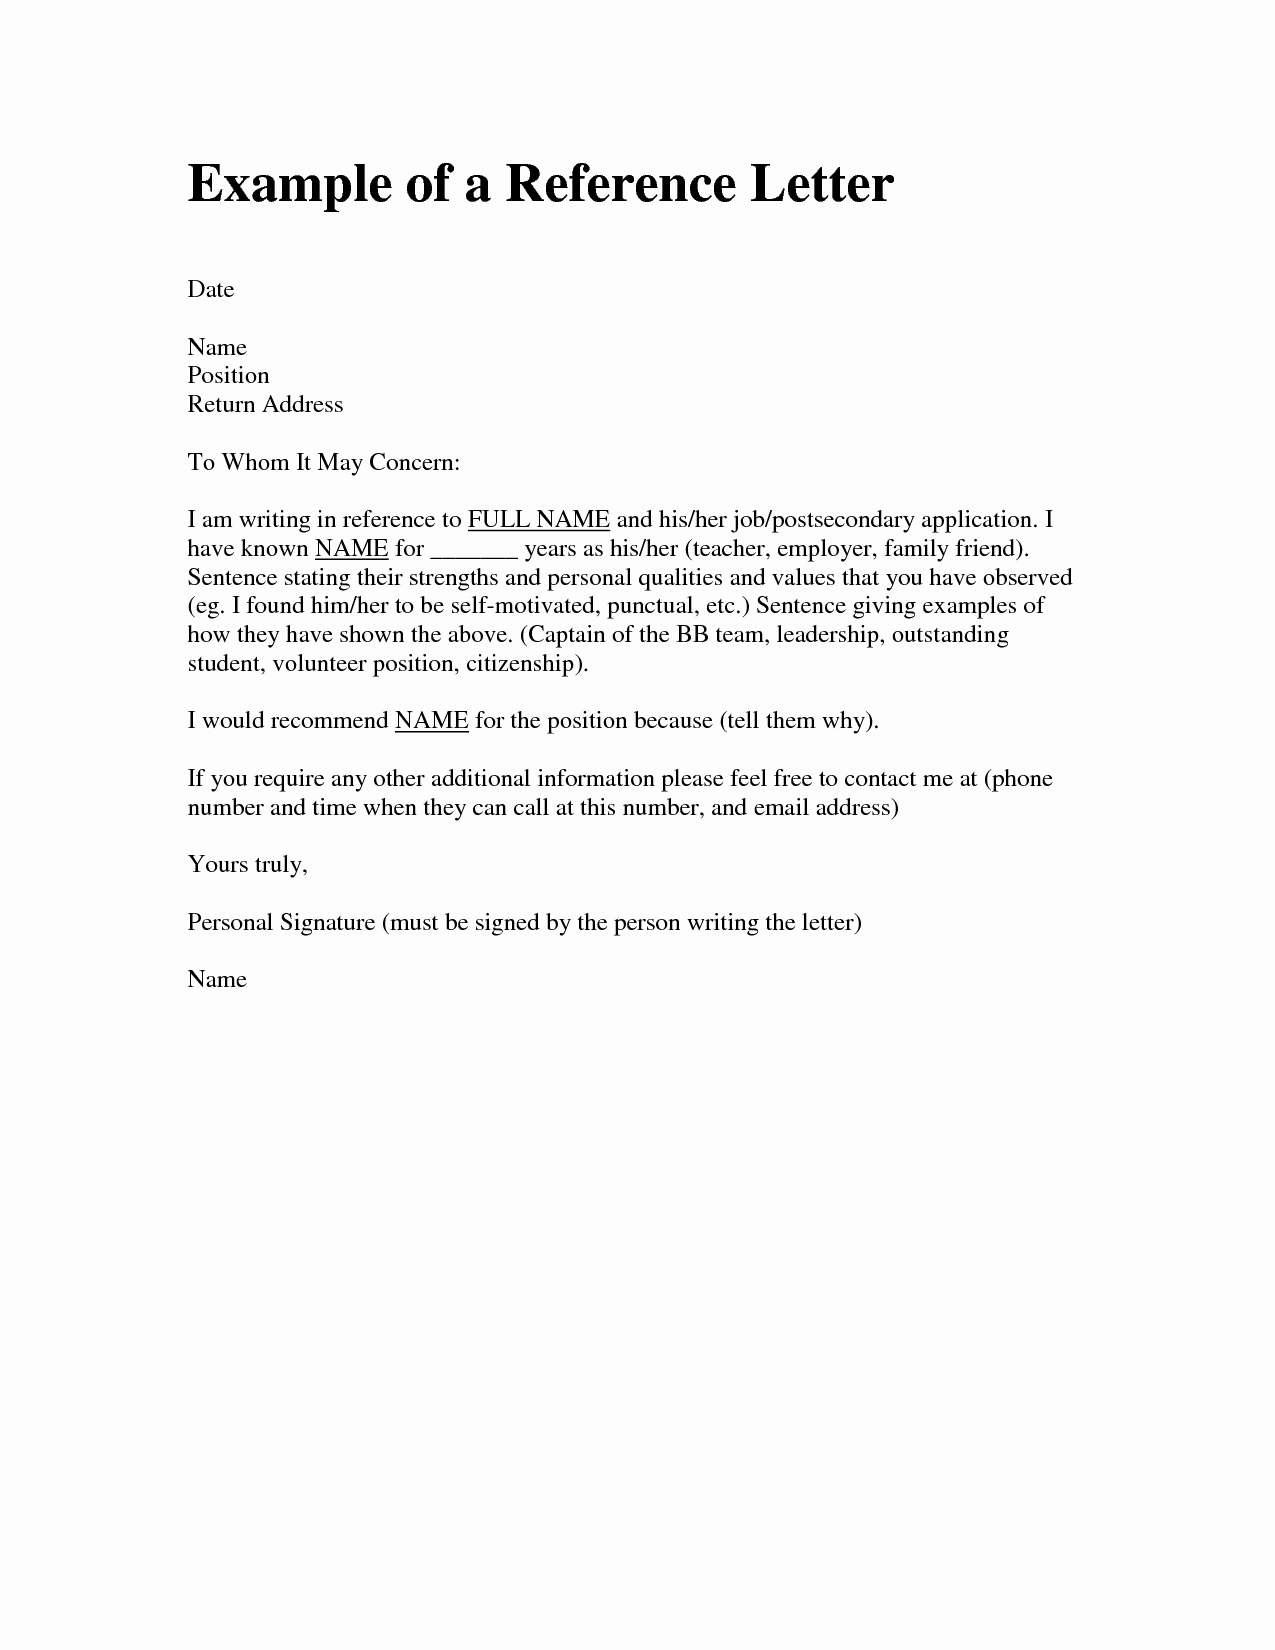 Personal Reference Letter Template Free Fresh Sample Personal Re Mendation Letter for Employment